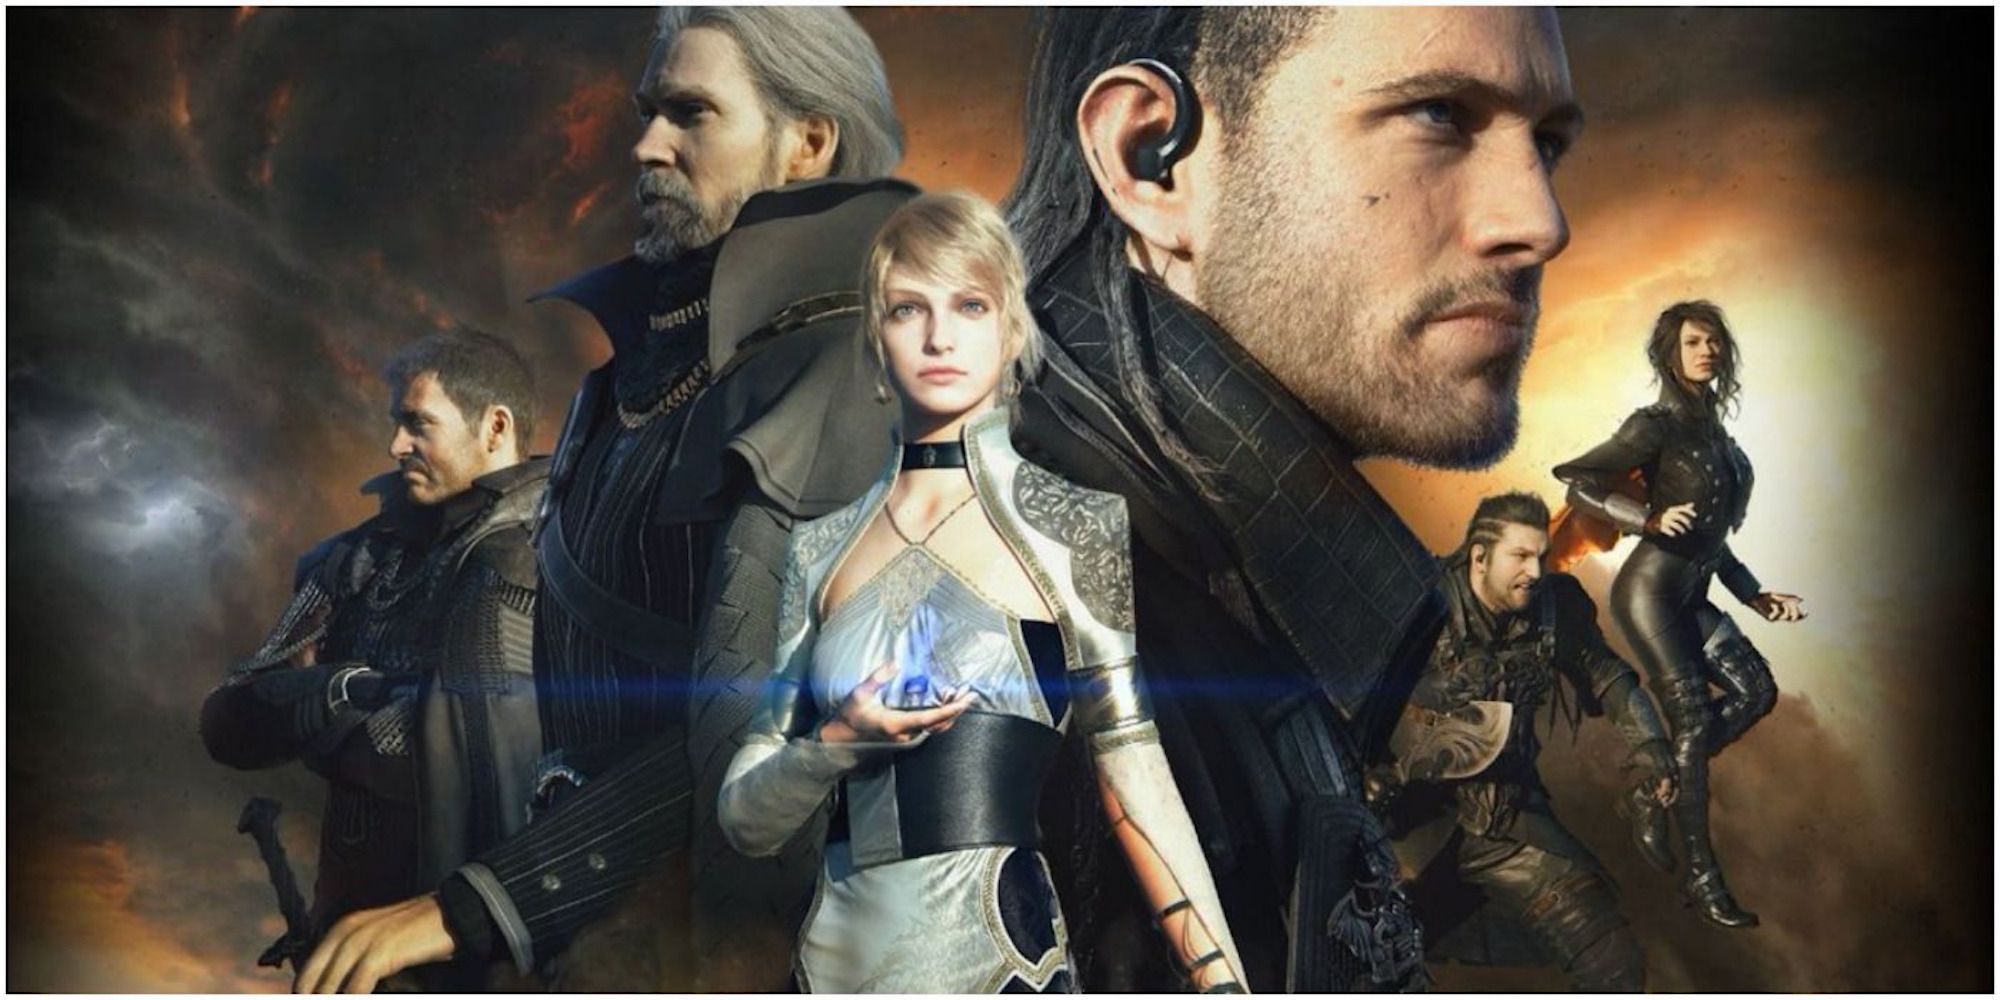 Promo art featuring characters from Kingsglaive: Final Fantasy XV